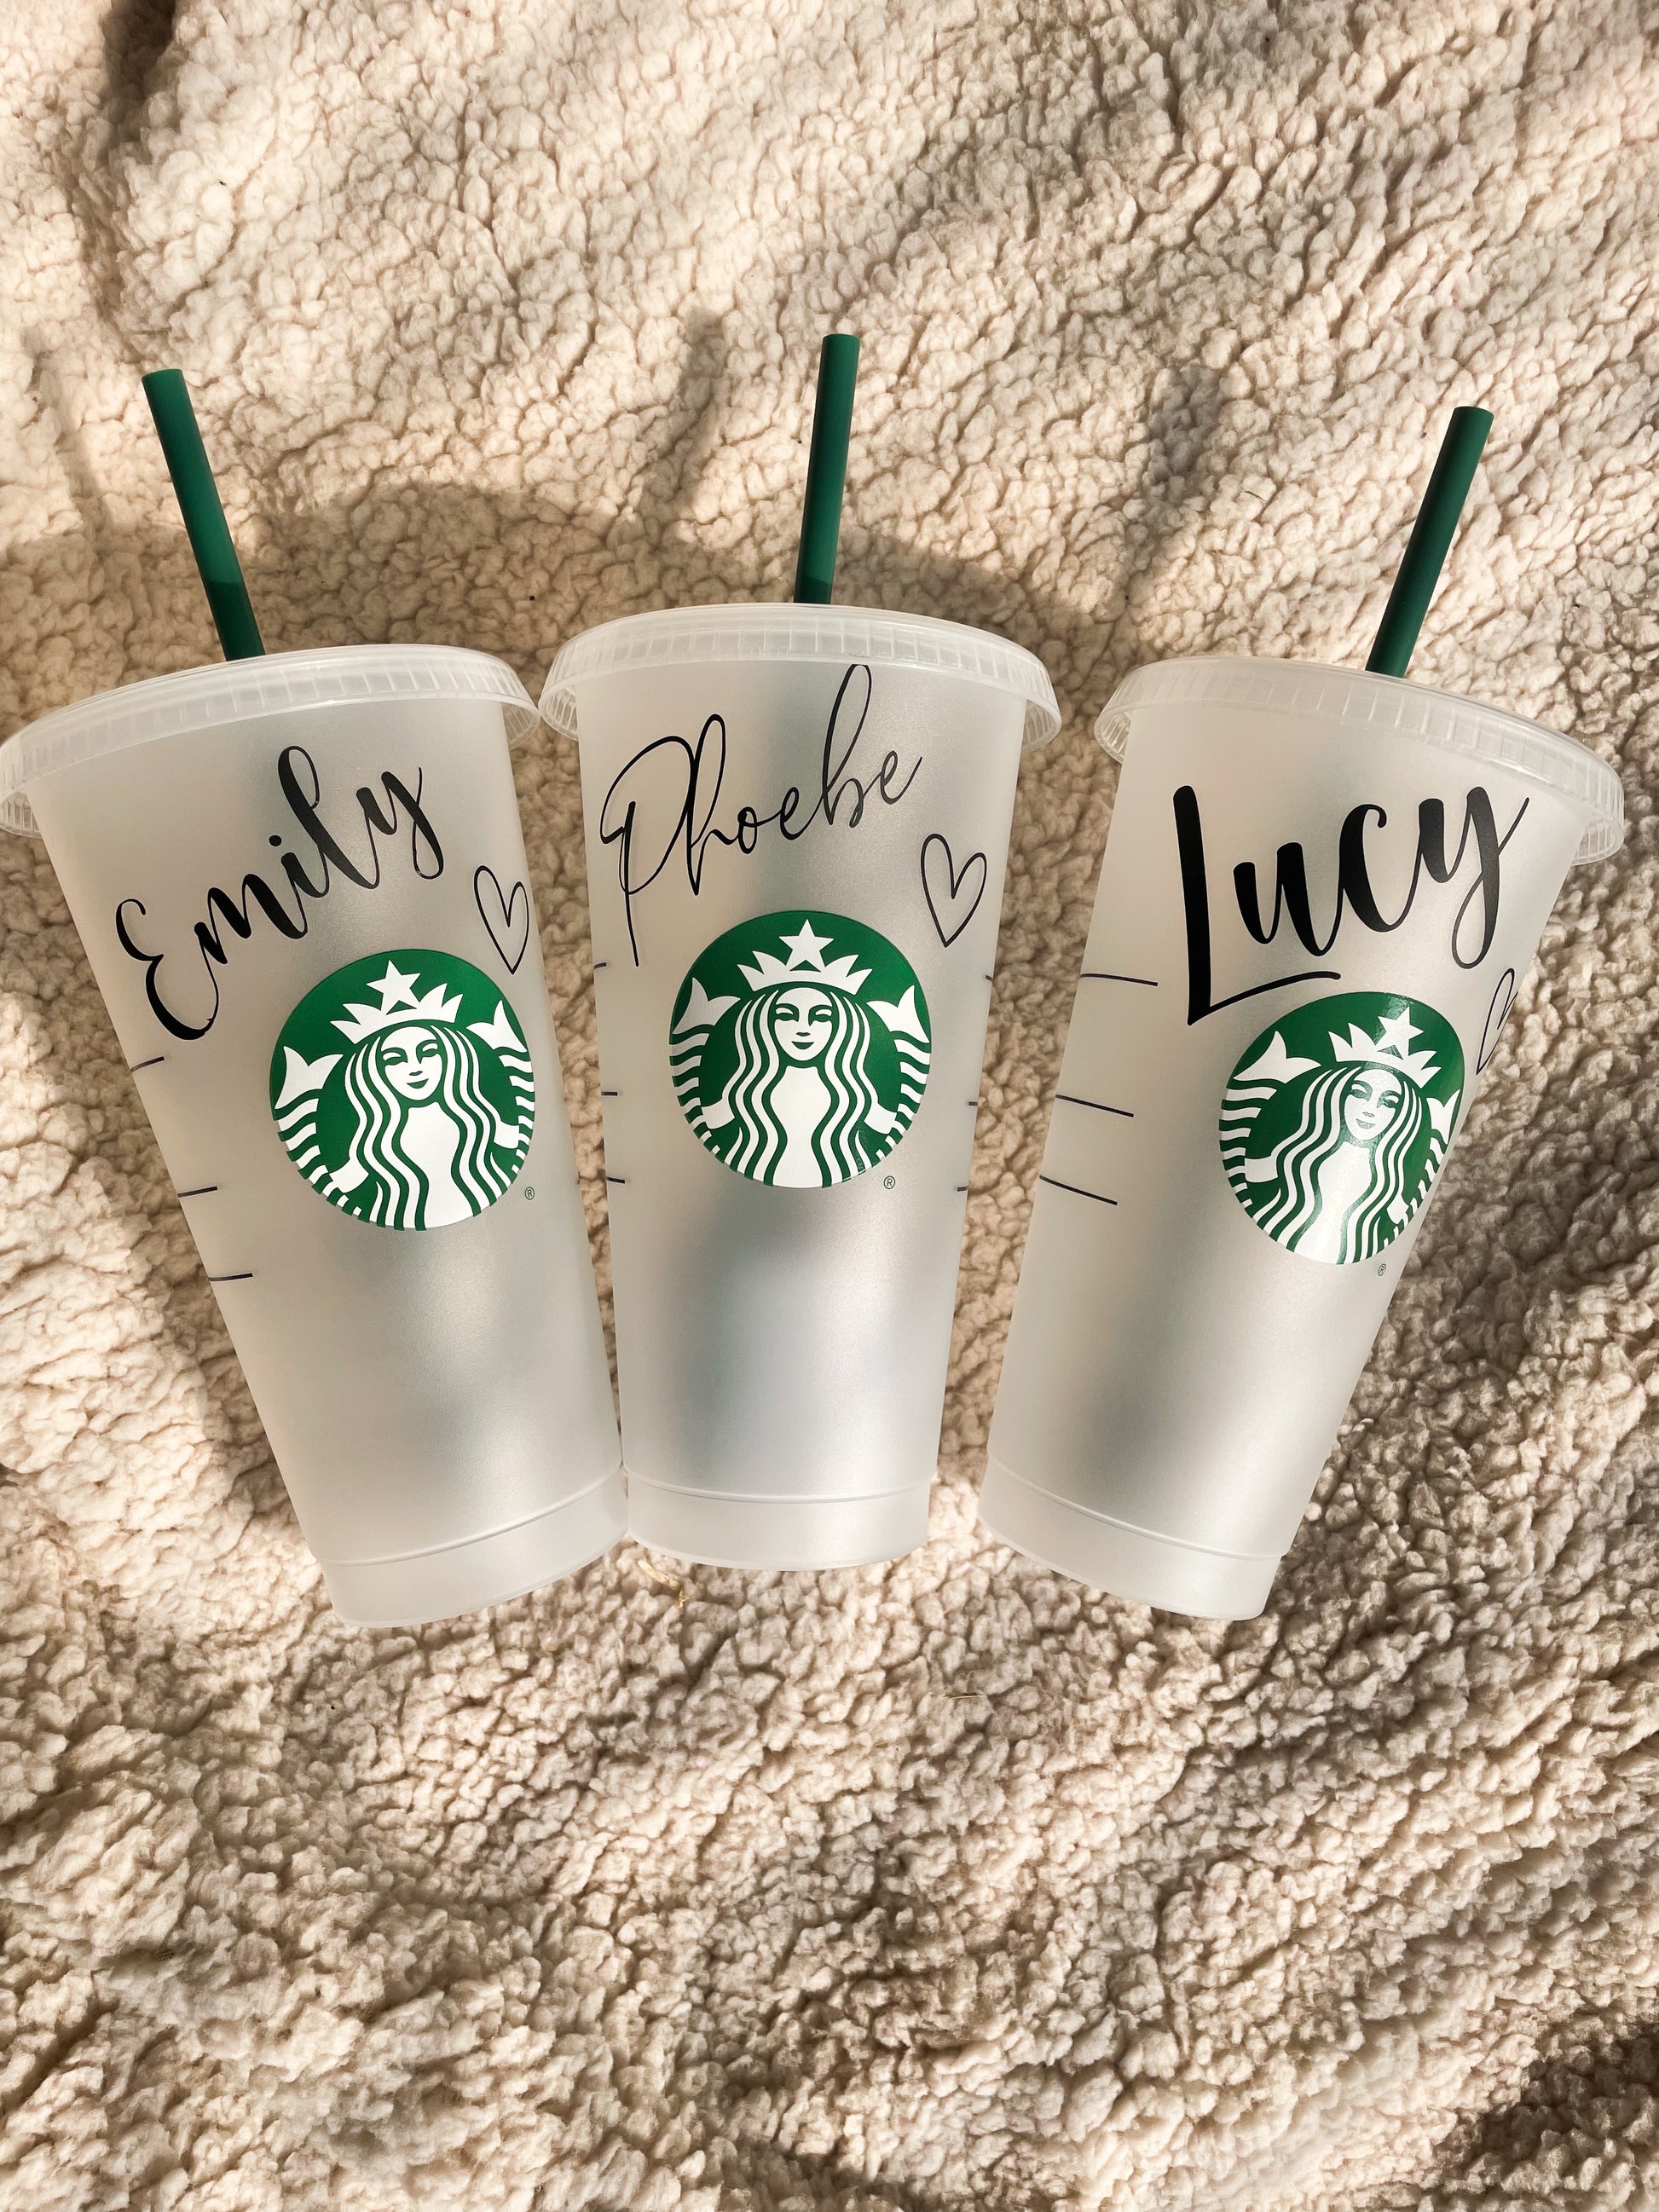 NEW* Starbucks Venti Reusable Iced Cold Coffee Cup - SAME DAY